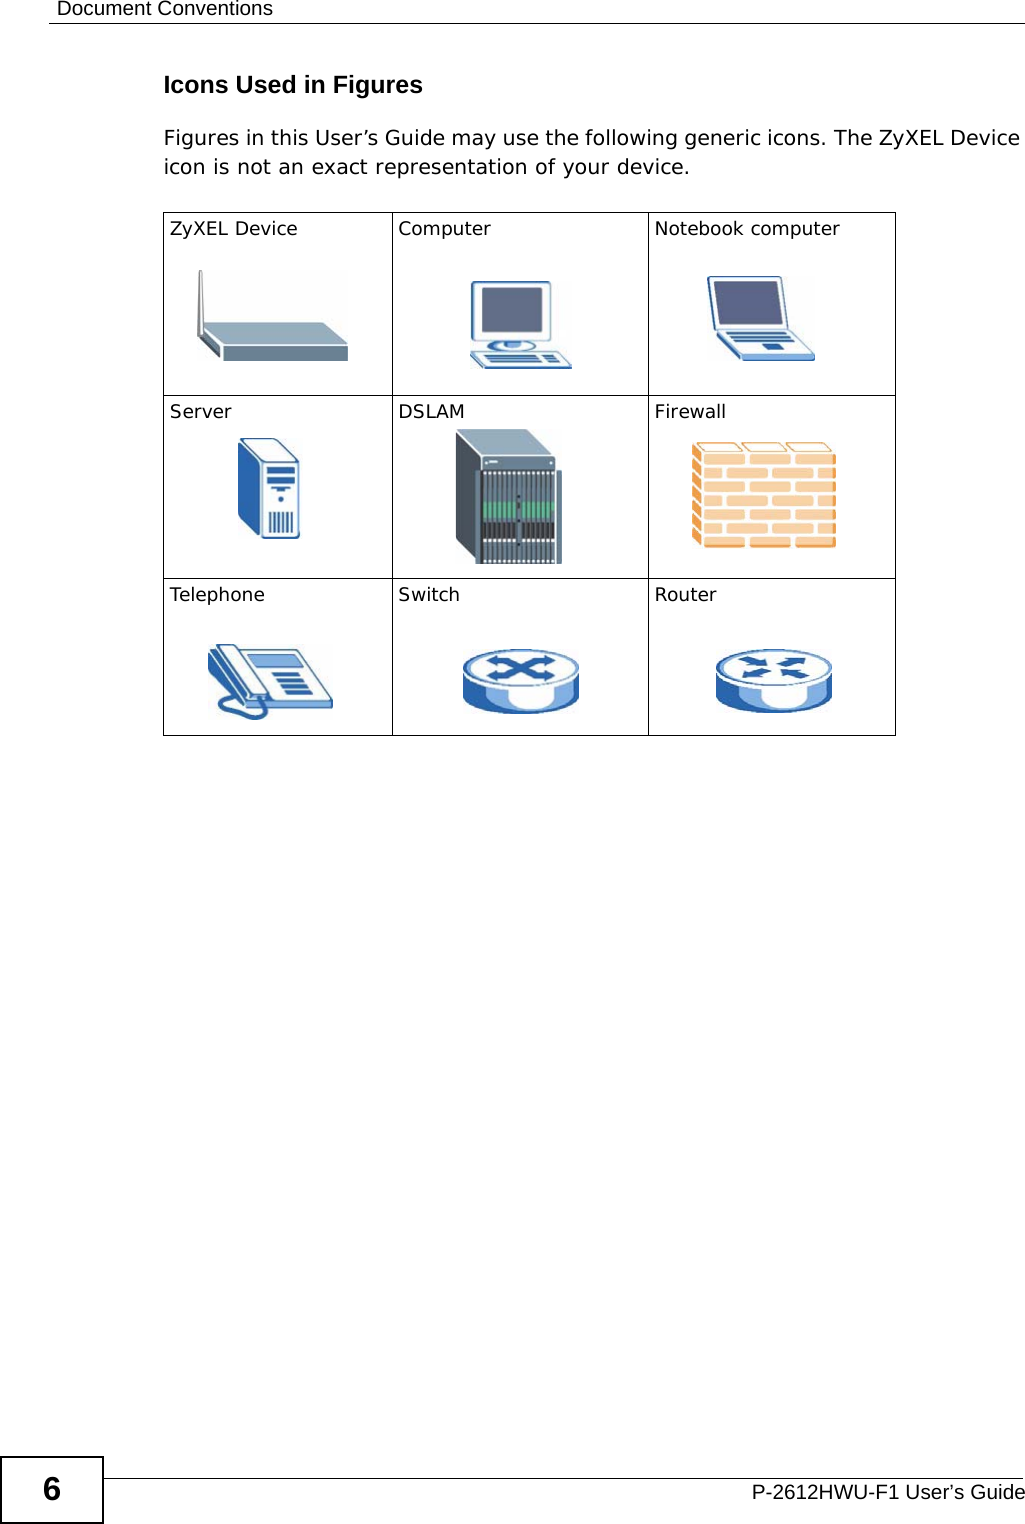 Document ConventionsP-2612HWU-F1 User’s Guide6Icons Used in FiguresFigures in this User’s Guide may use the following generic icons. The ZyXEL Device icon is not an exact representation of your device.ZyXEL Device Computer Notebook computerServer DSLAM FirewallTelephone Switch Router